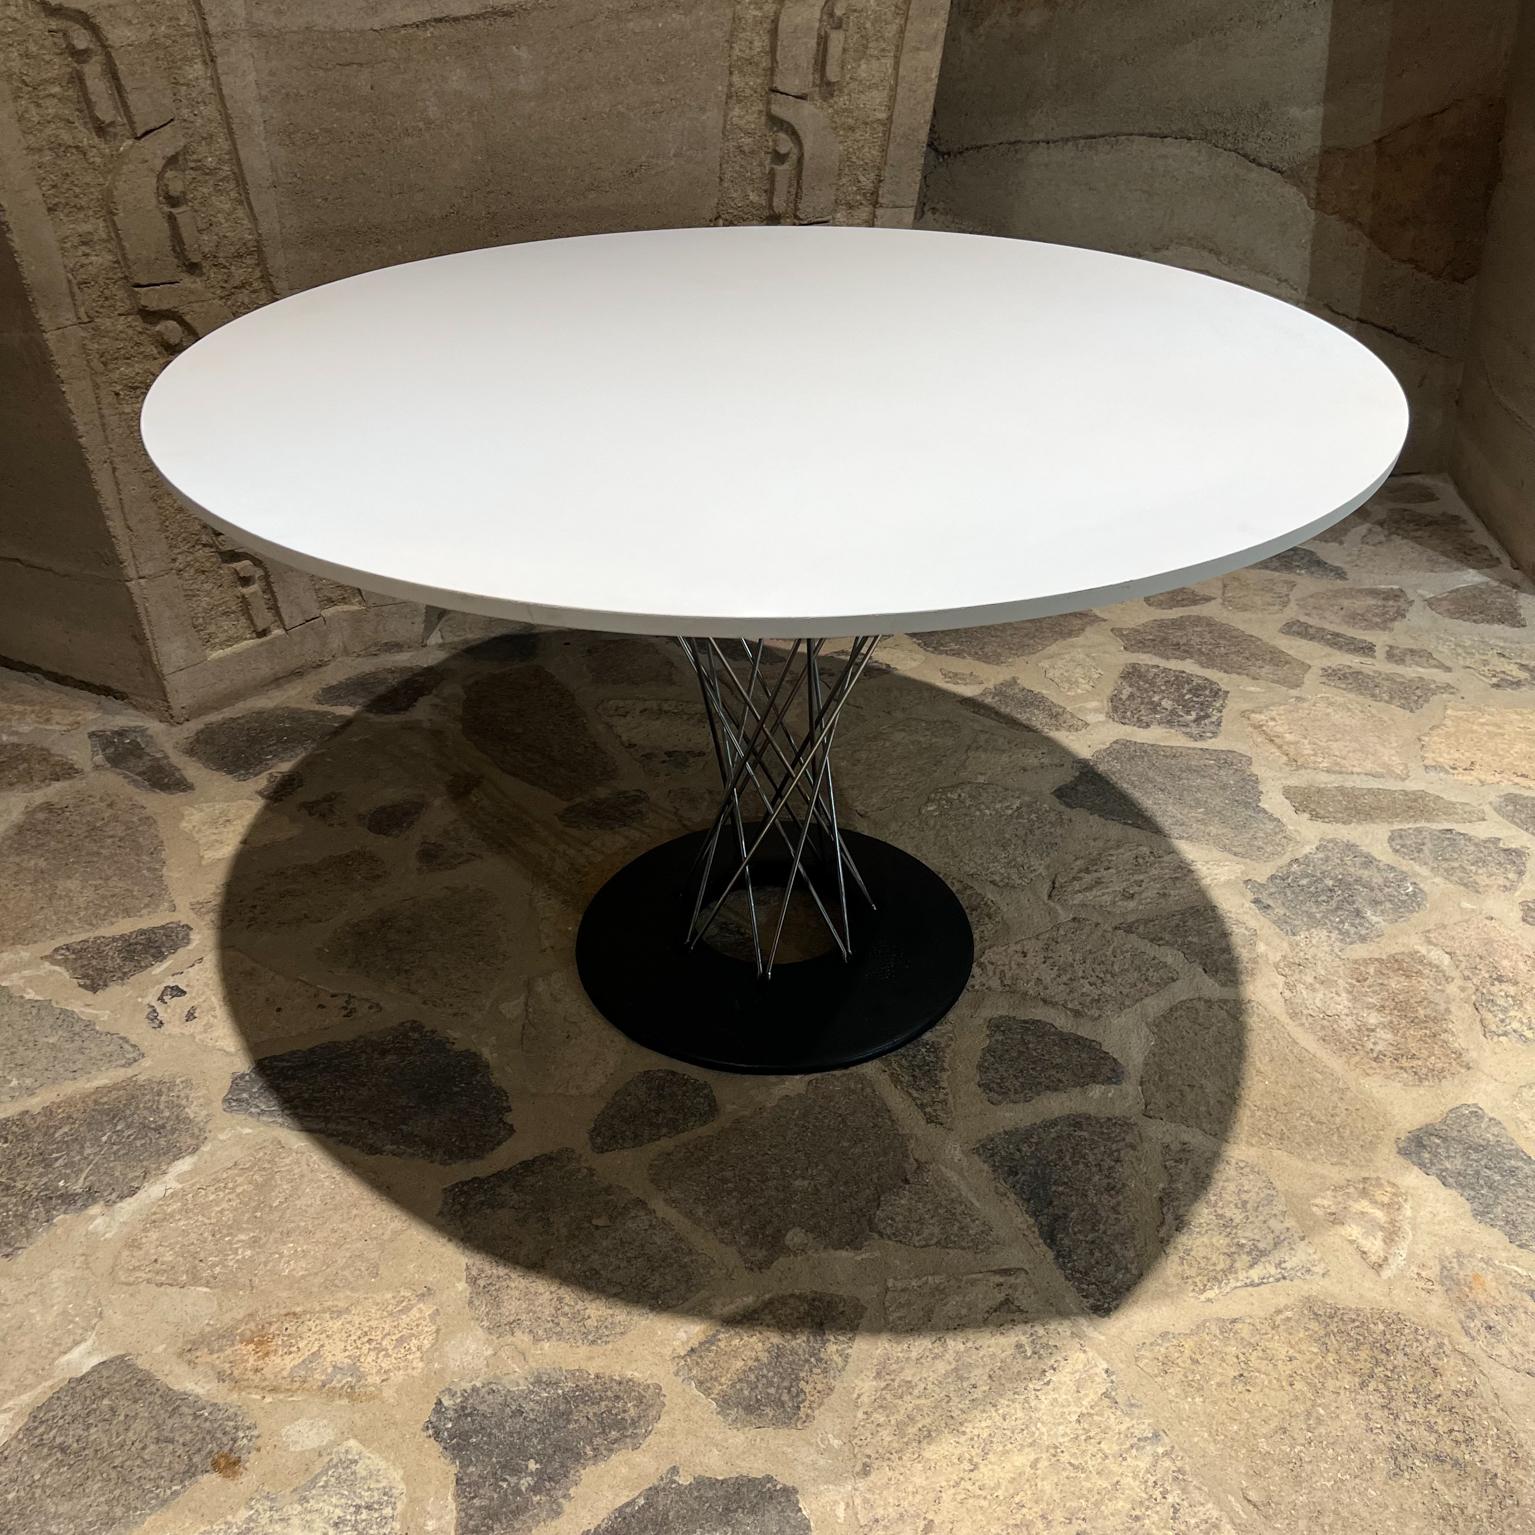 11957 Isamu Noguchi for Knoll Original Mod Cyclone Dining Table In Good Condition For Sale In Chula Vista, CA